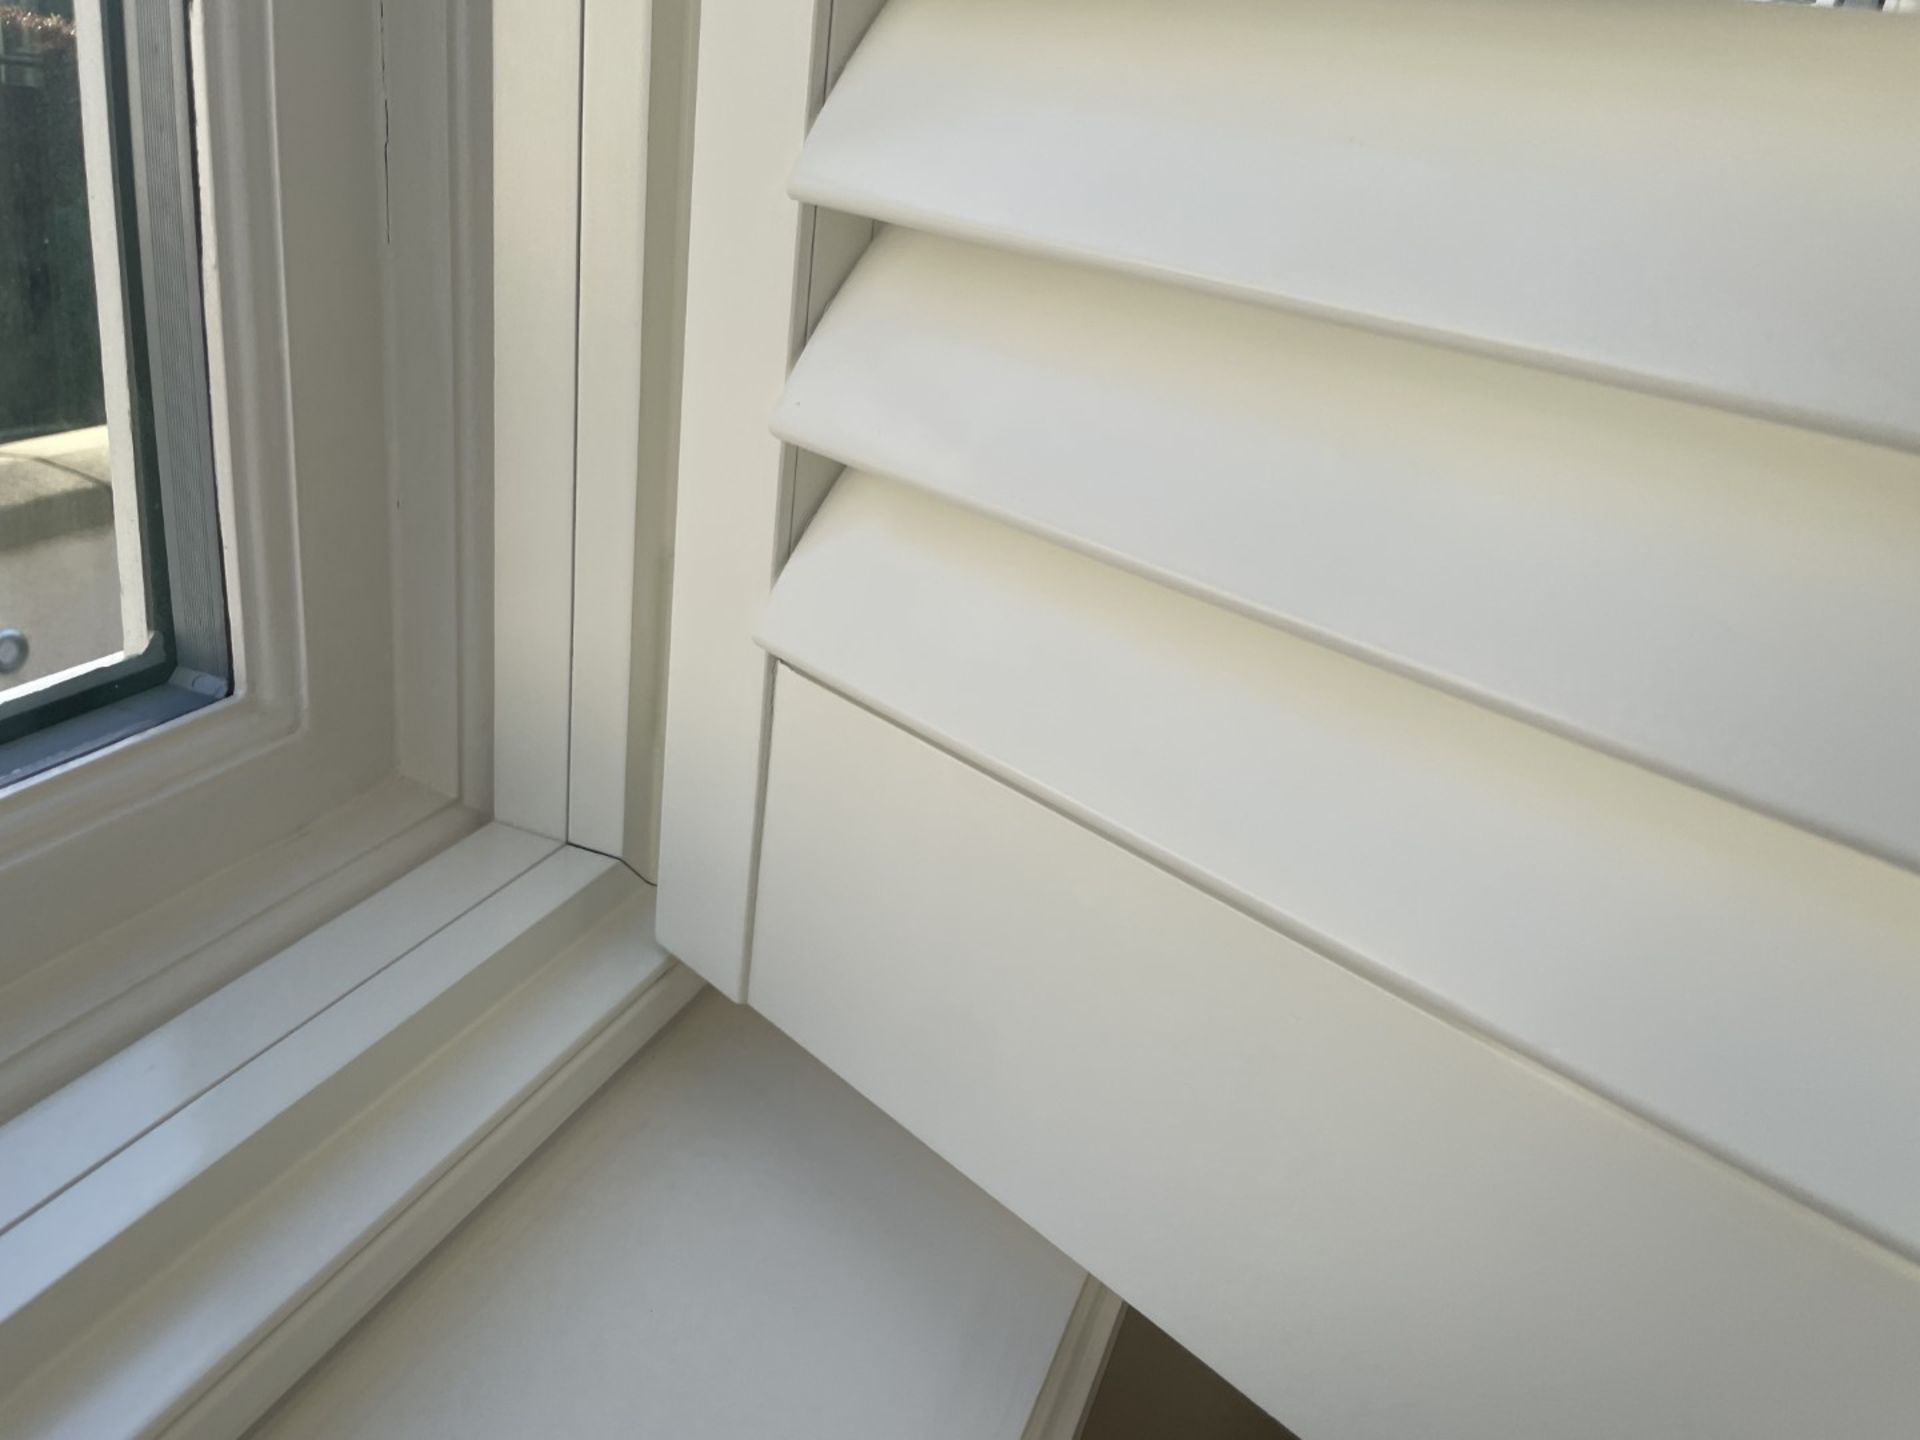 1 x Hardwood Timber Double Glazed Window Frames fitted with Shutter Blinds, In White - Ref: PAN101 - Image 13 of 23